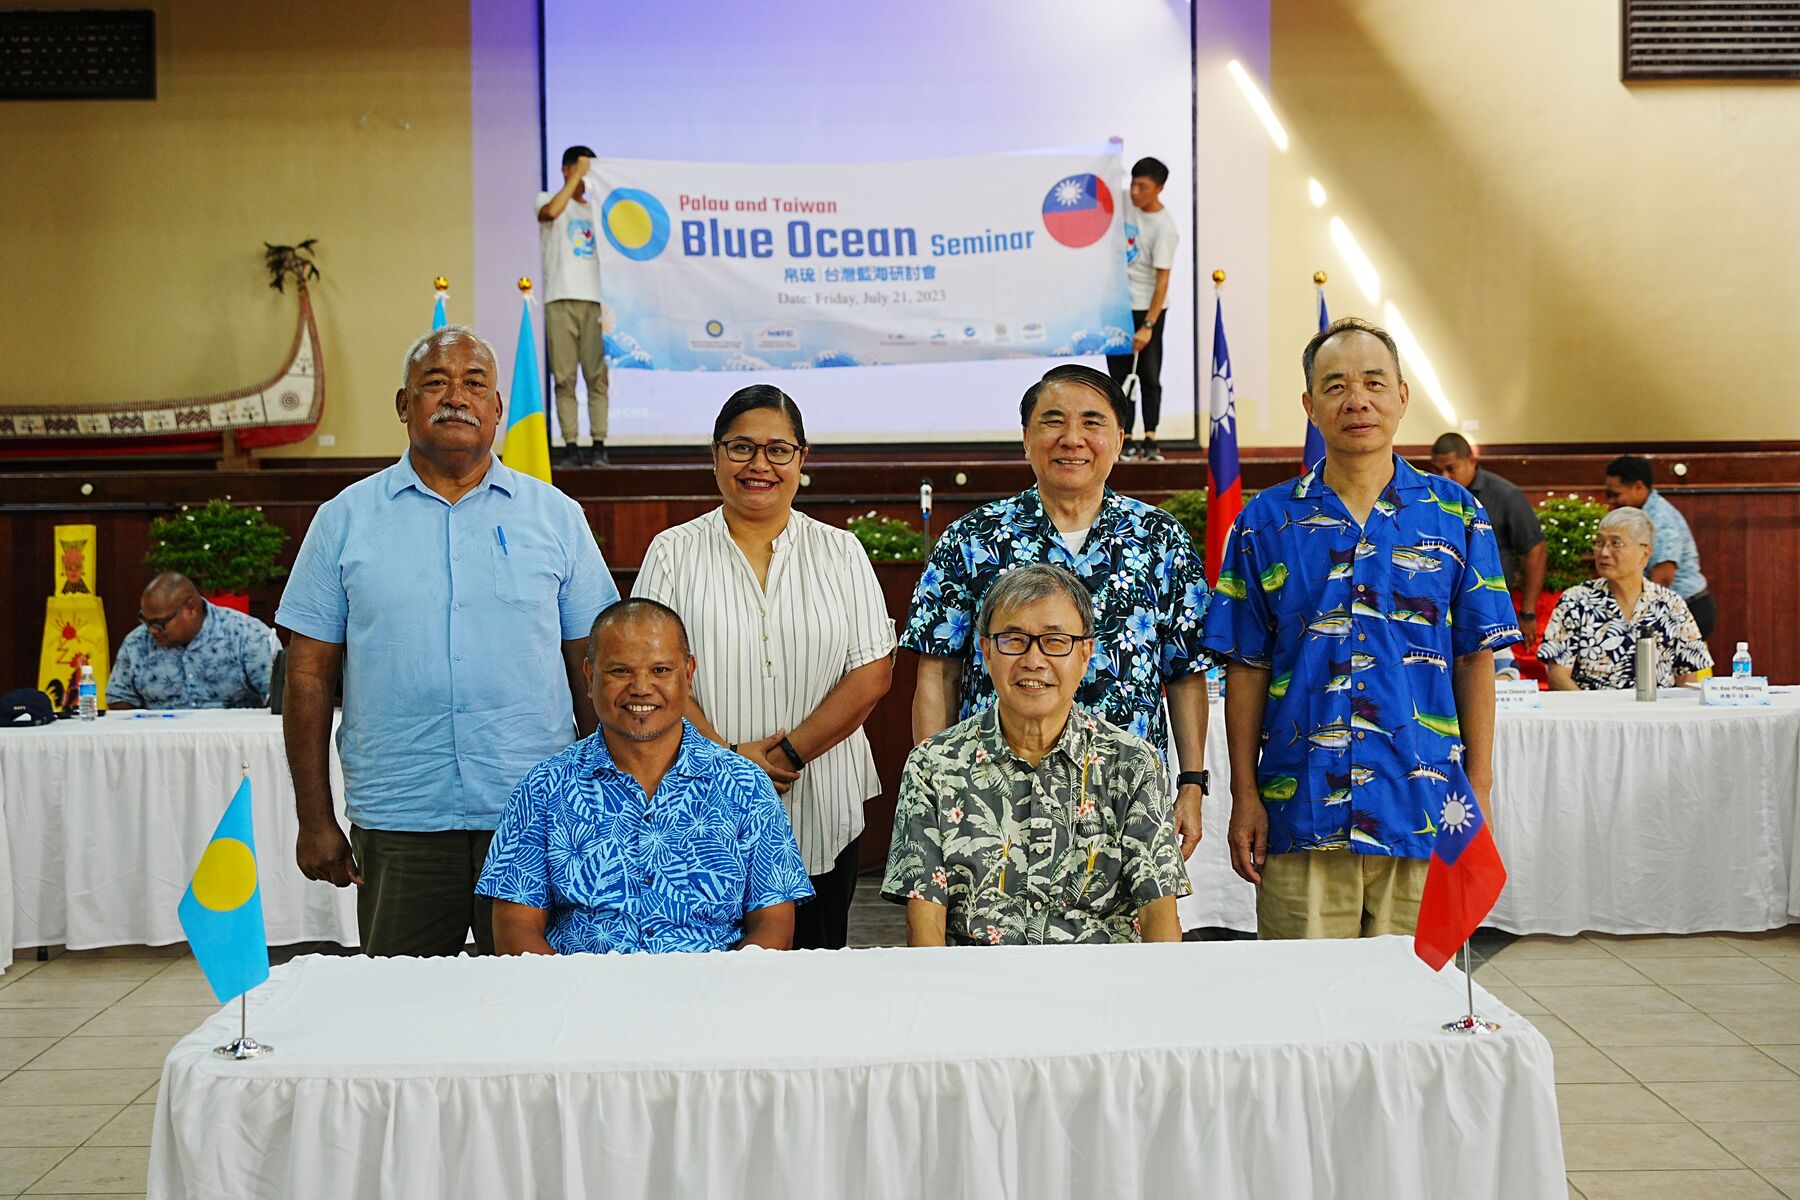 NSYSU, Minister of Agriculture, Fisheries, and the Environment of Palau, Palau Community College, and Palau International Coral Reef Center announced the collaboration by signing a memorandum of understanding (MOU) at the Palau and Taiwan Blue Ocean Seminar. Through this collaboration, NSYSU and Palau’s academic institutions will collectively initiate various projects of oceanography, such as blue carbon economy, climate change, marine ecological system conservation, and marine biodiversity